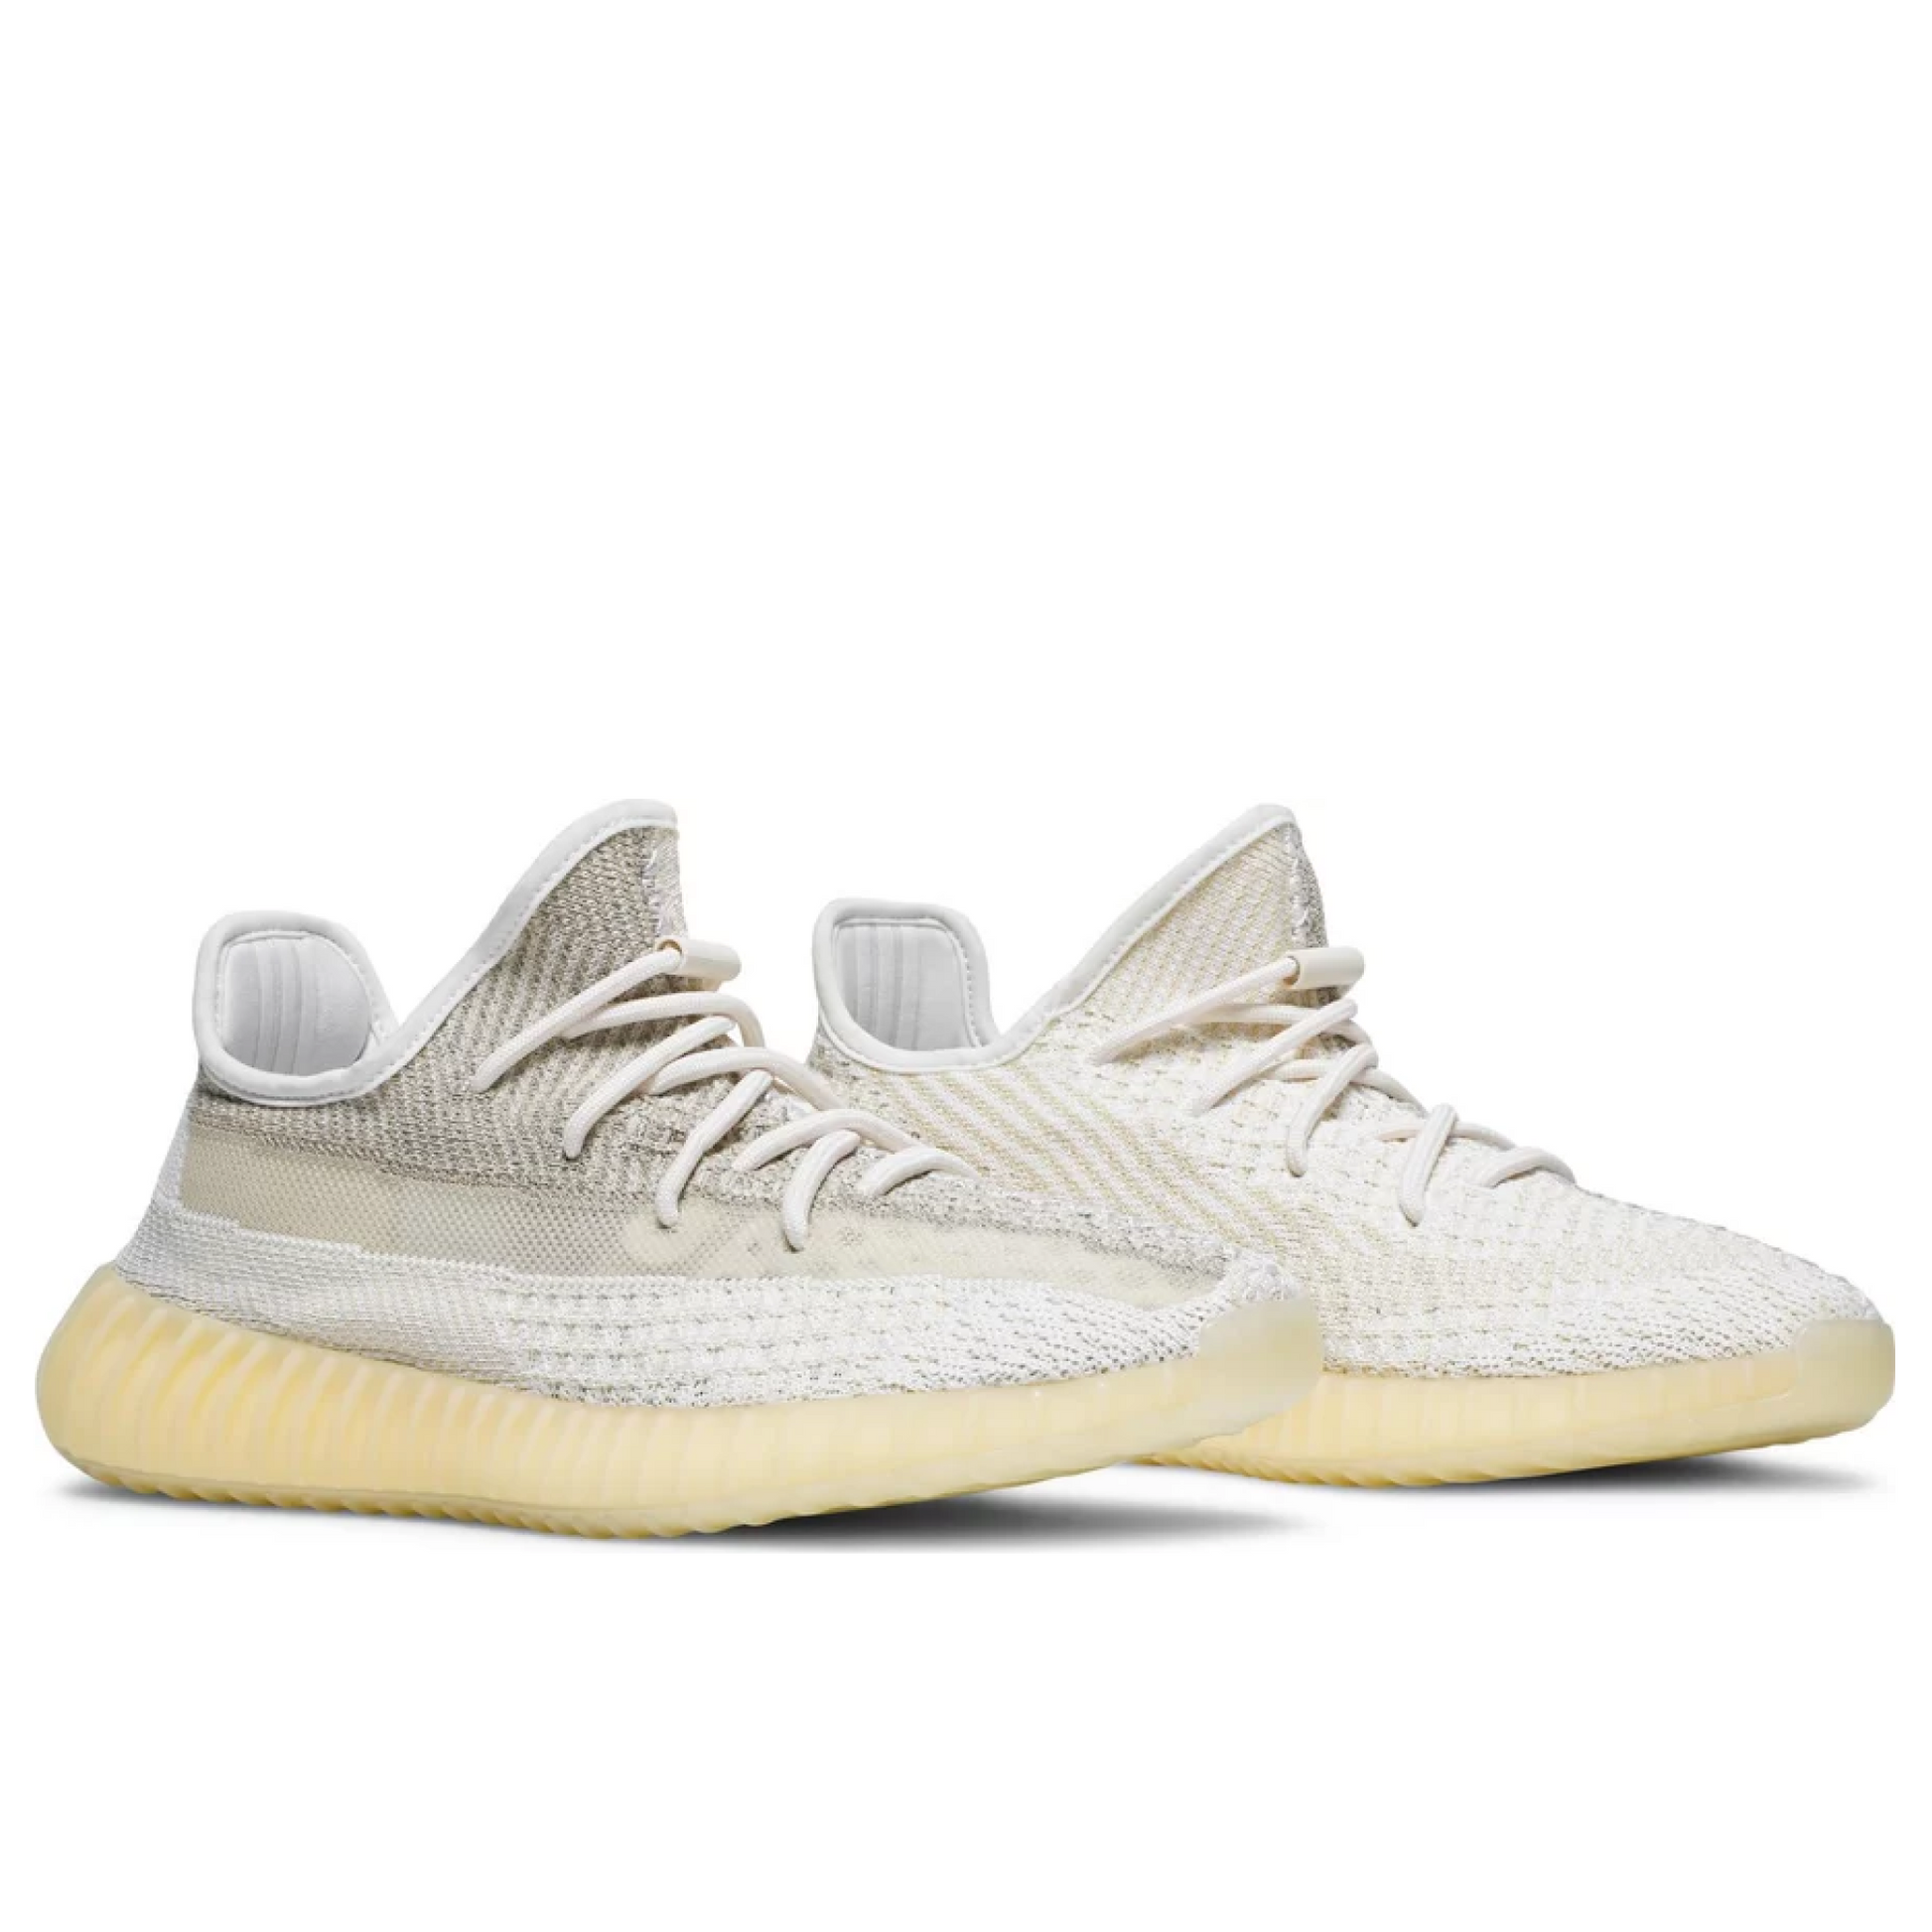 Adidas Yeezy Boost 350 V2 Natural Yeezy